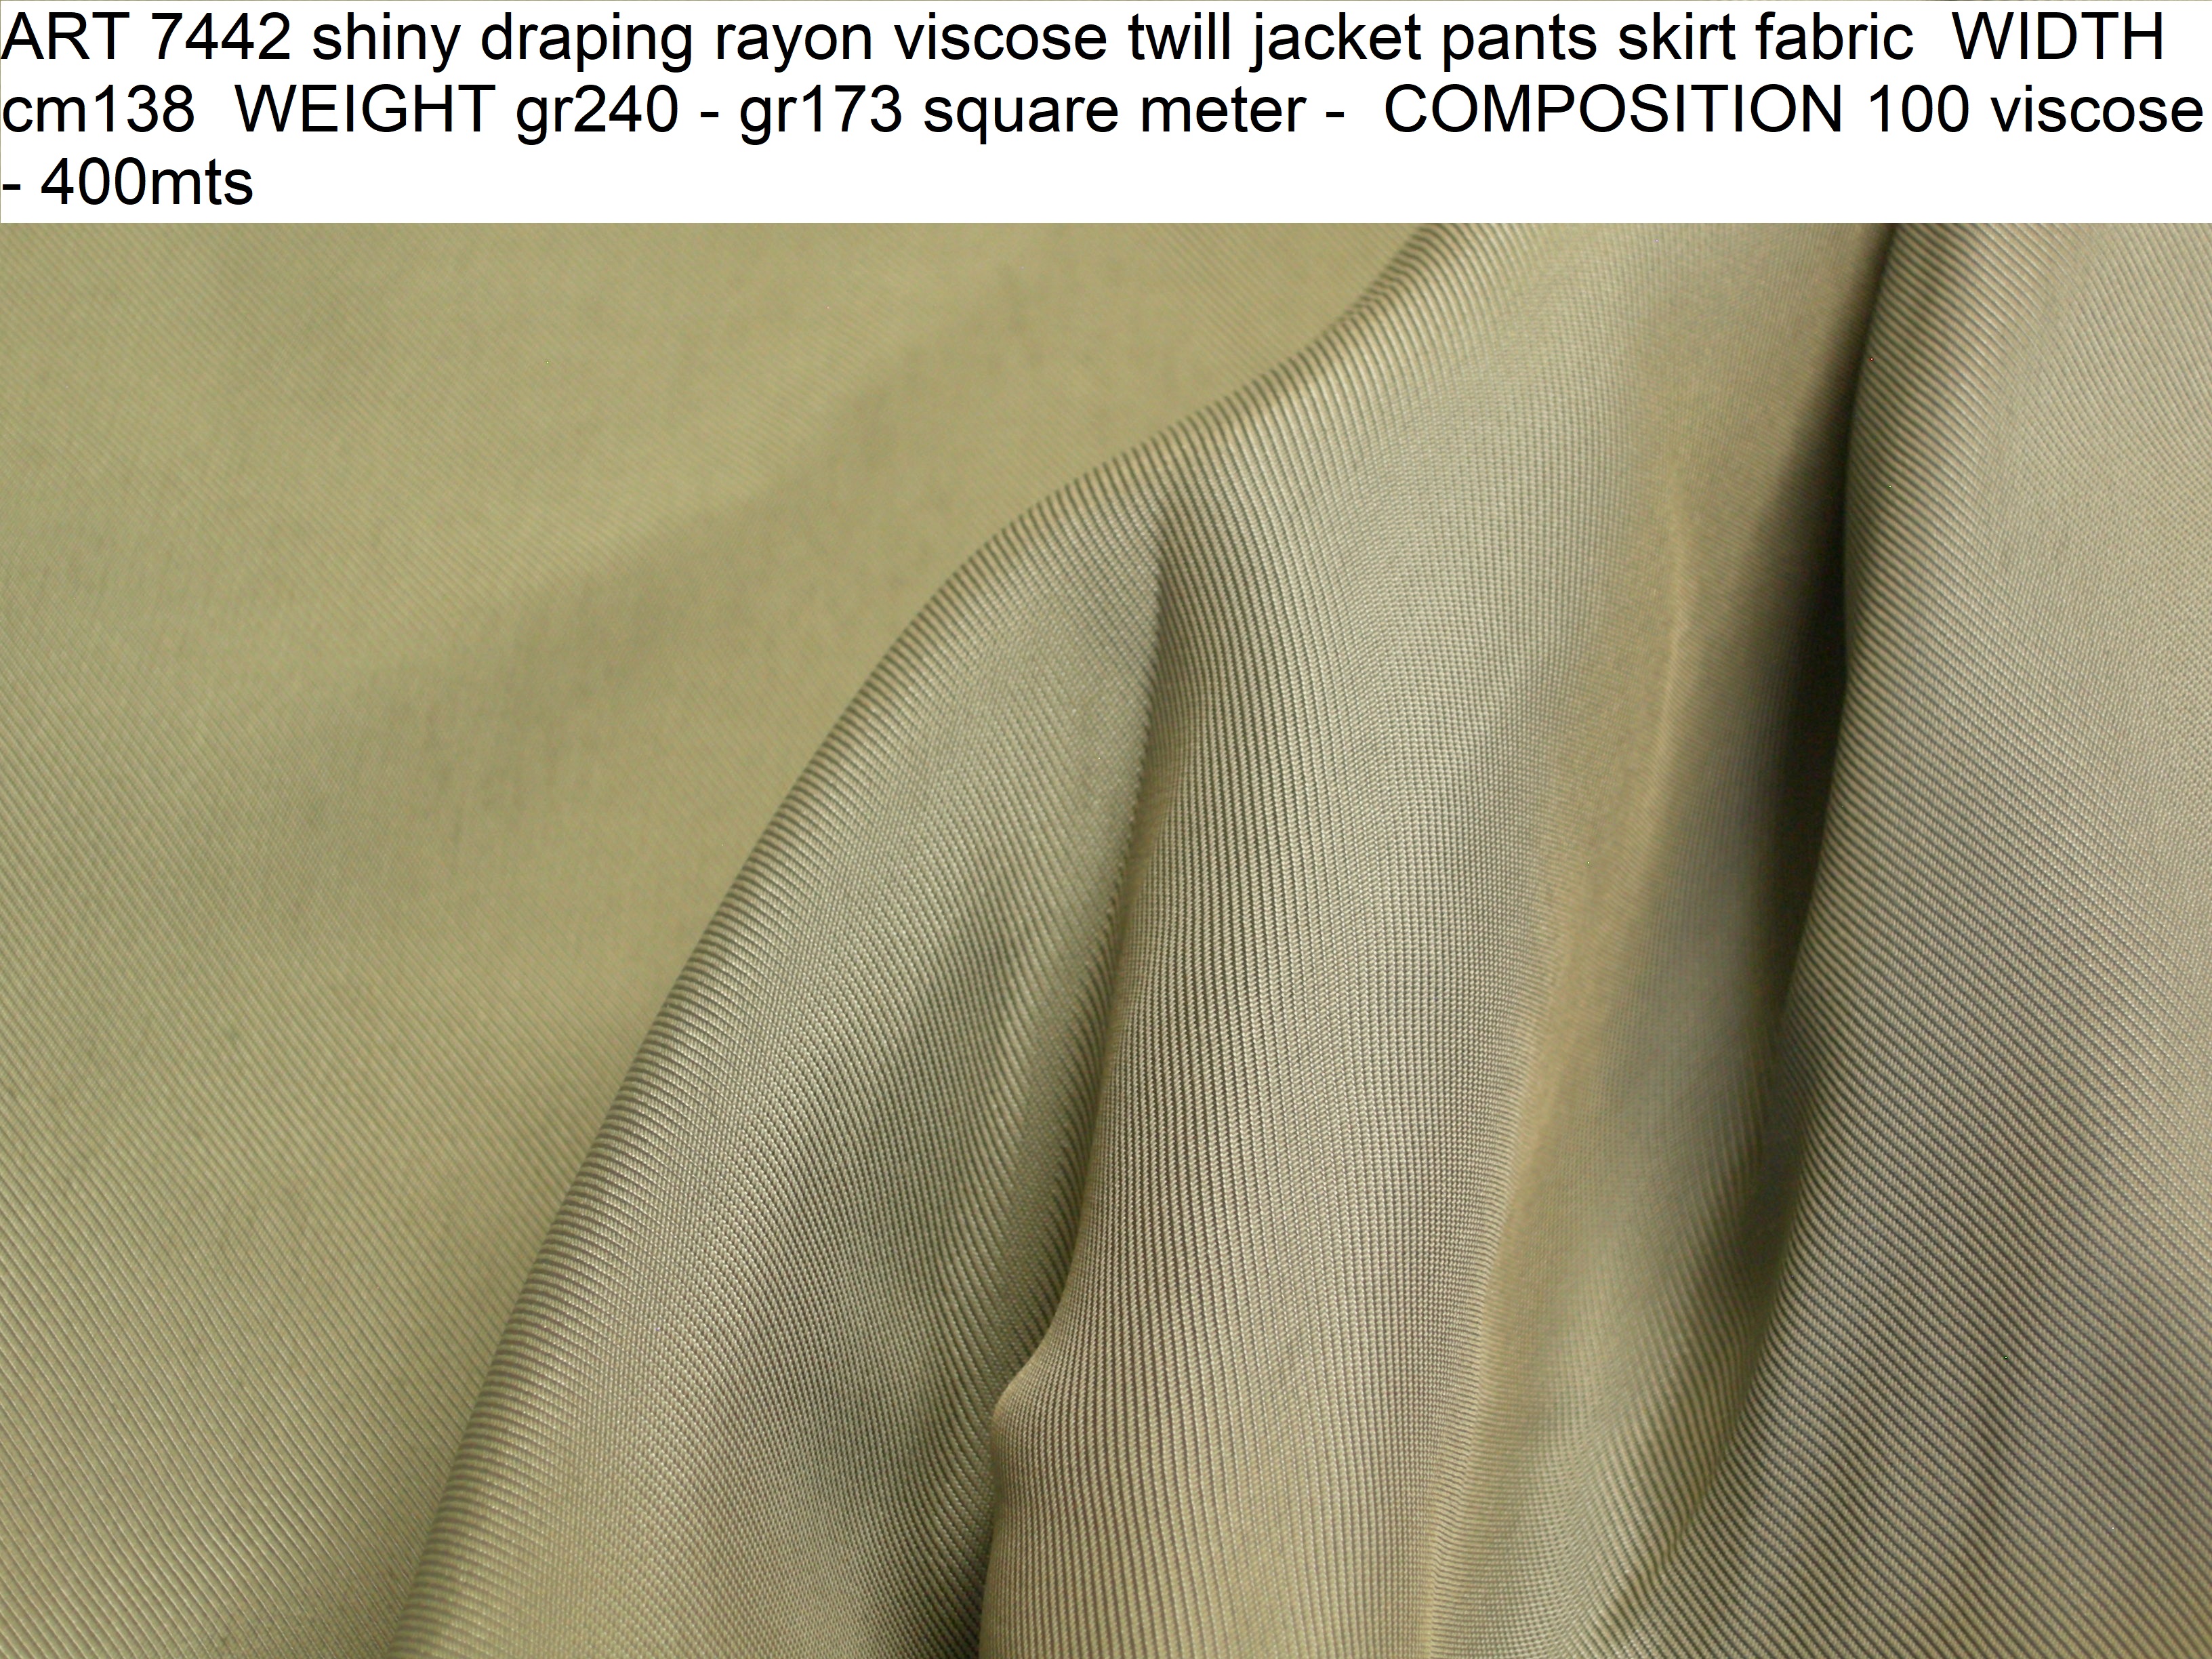 ART 7442 shiny draping rayon viscose twill jacket pants skirt fabric WIDTH cm138 WEIGHT gr240 - gr173 square meter - COMPOSITION 100 viscose - 400mts